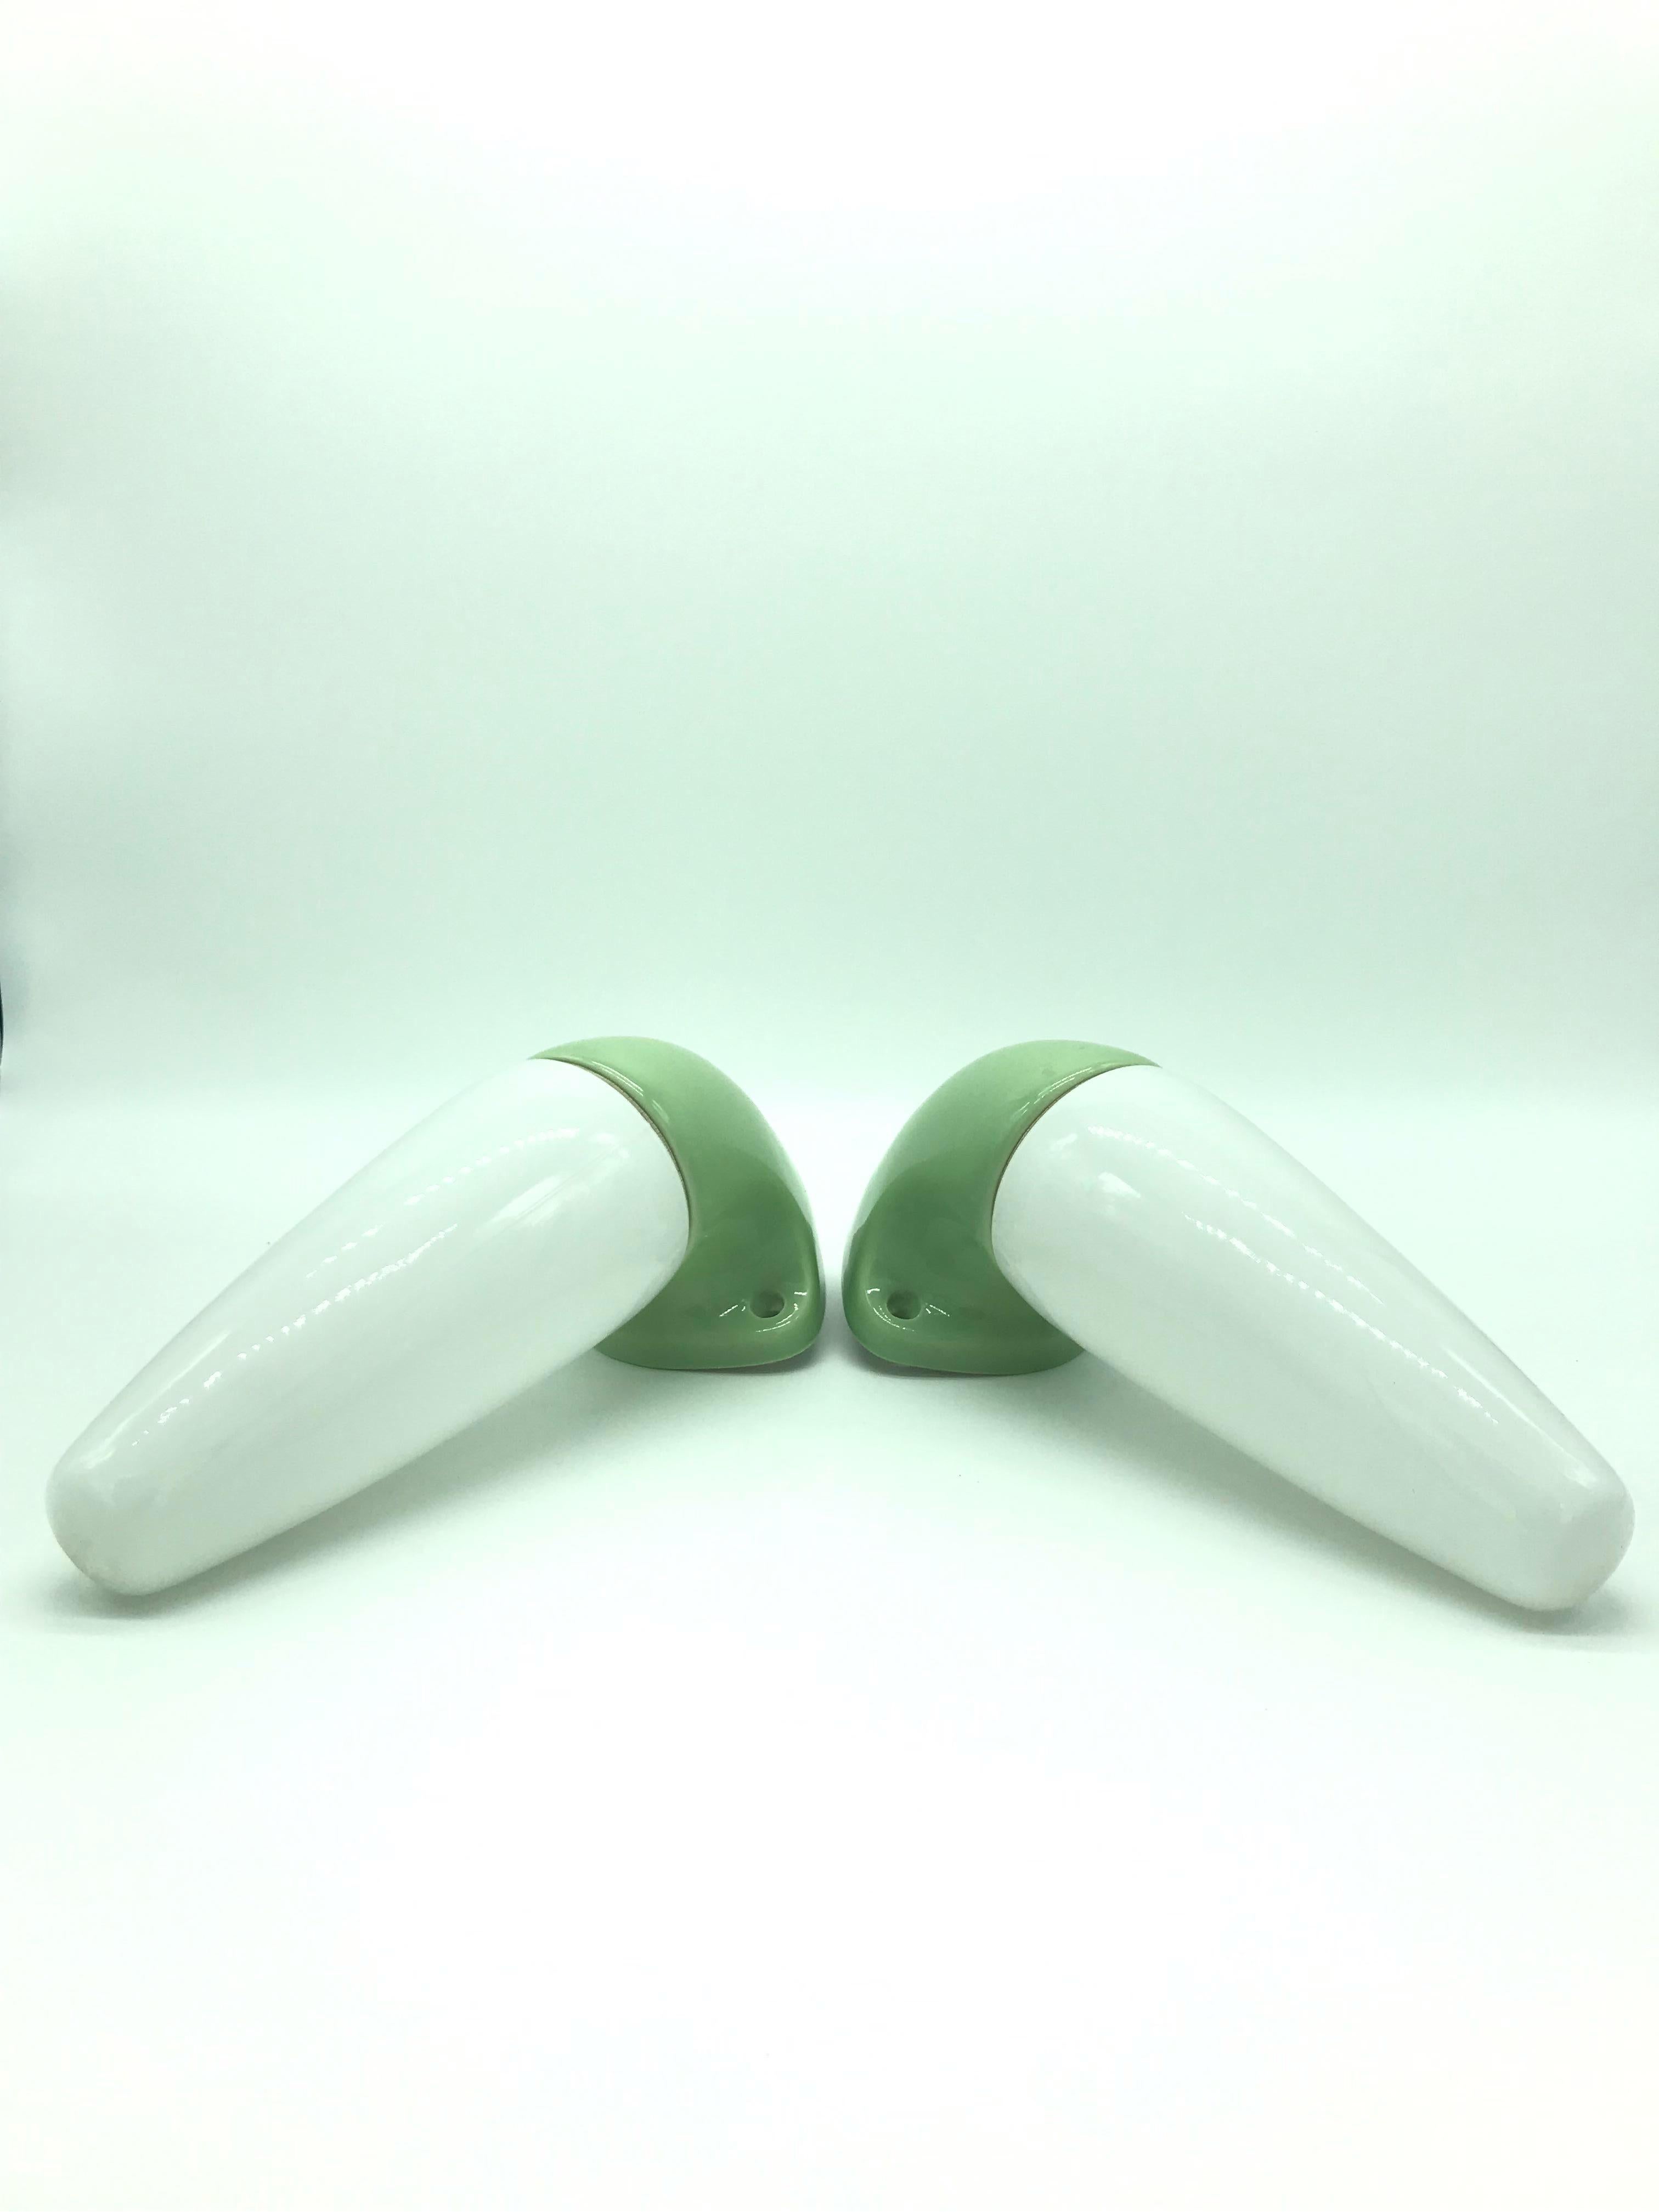 A pair of vintage Ifö of Sweden ceramic bathroom lamps model 6035 from the 1960s in lime green.
Designed by Sigvard Bernadotte. 
Opaline glass shades. 
Ceramic bulb holders for an E14 bulb
Lamps can be used as up or down lights.
In great condition